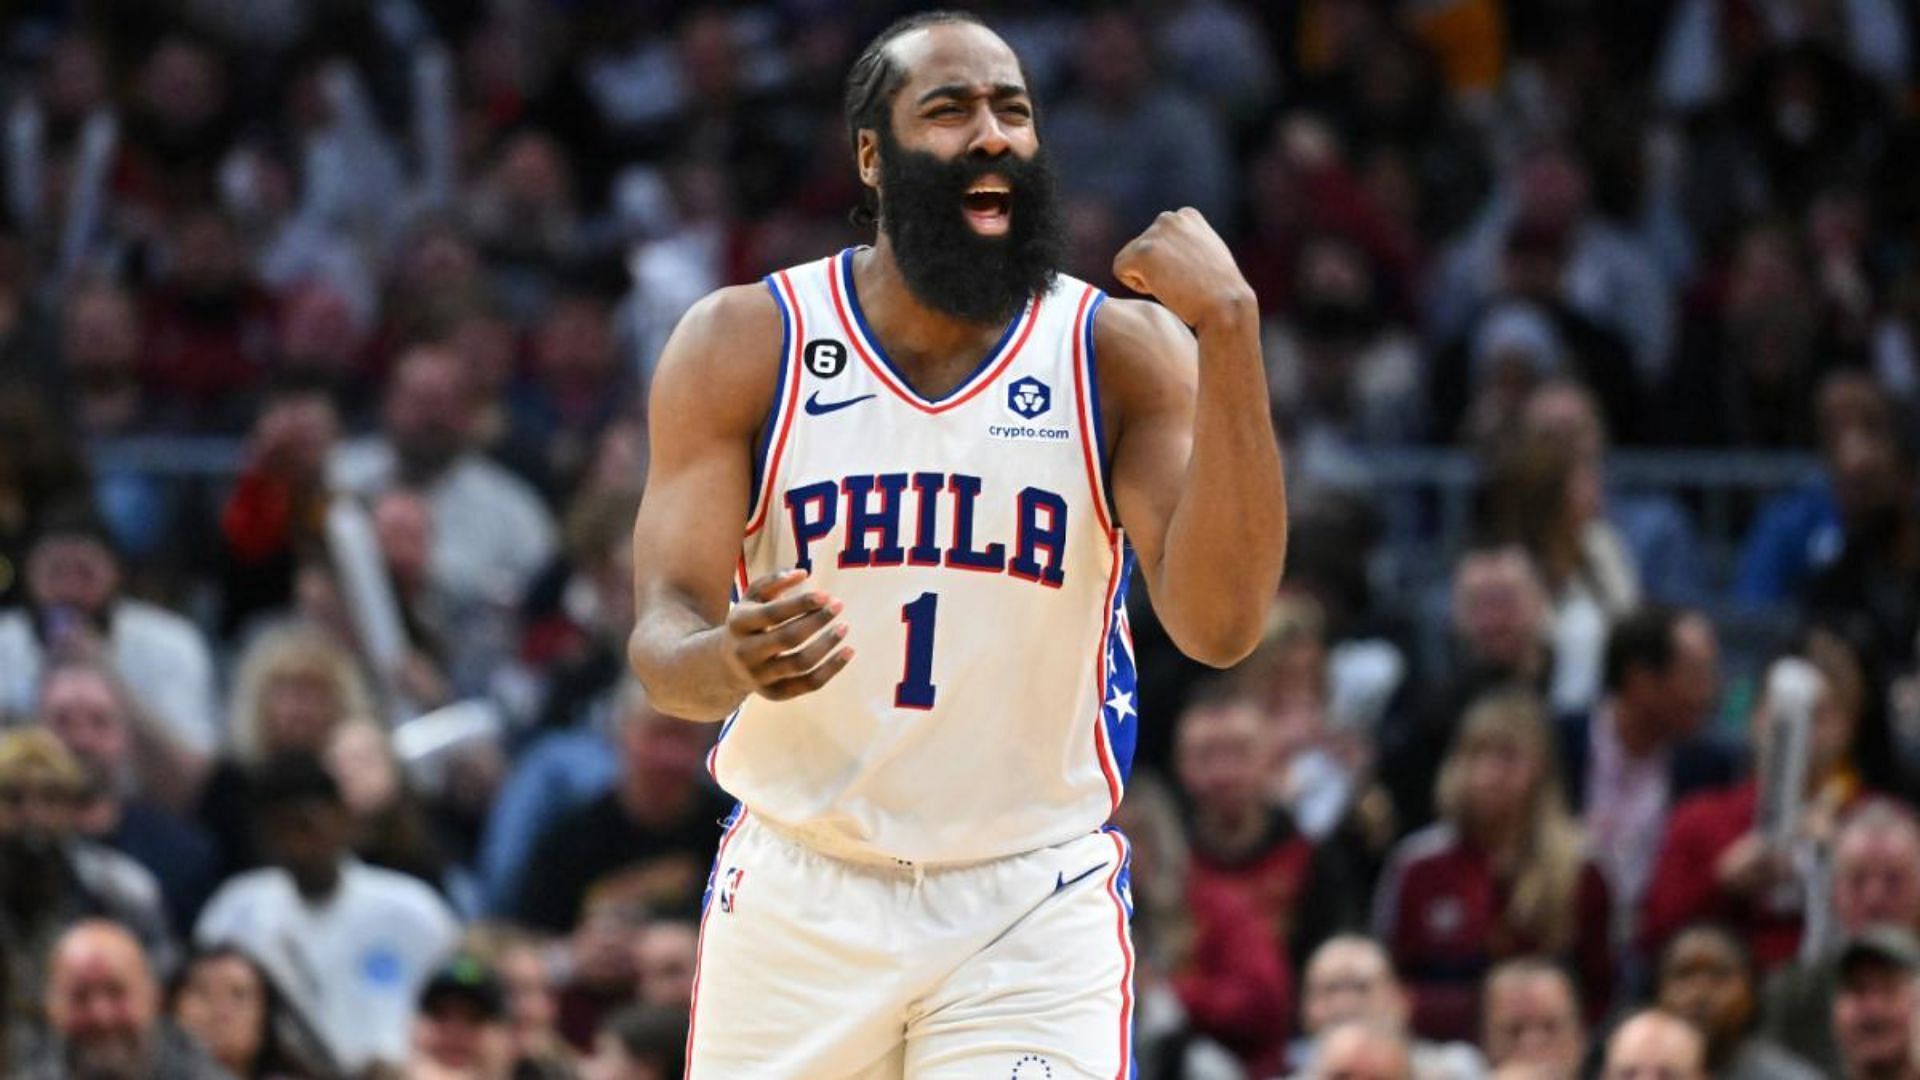 James Harden reacts to a play [Source: CBS Sports]